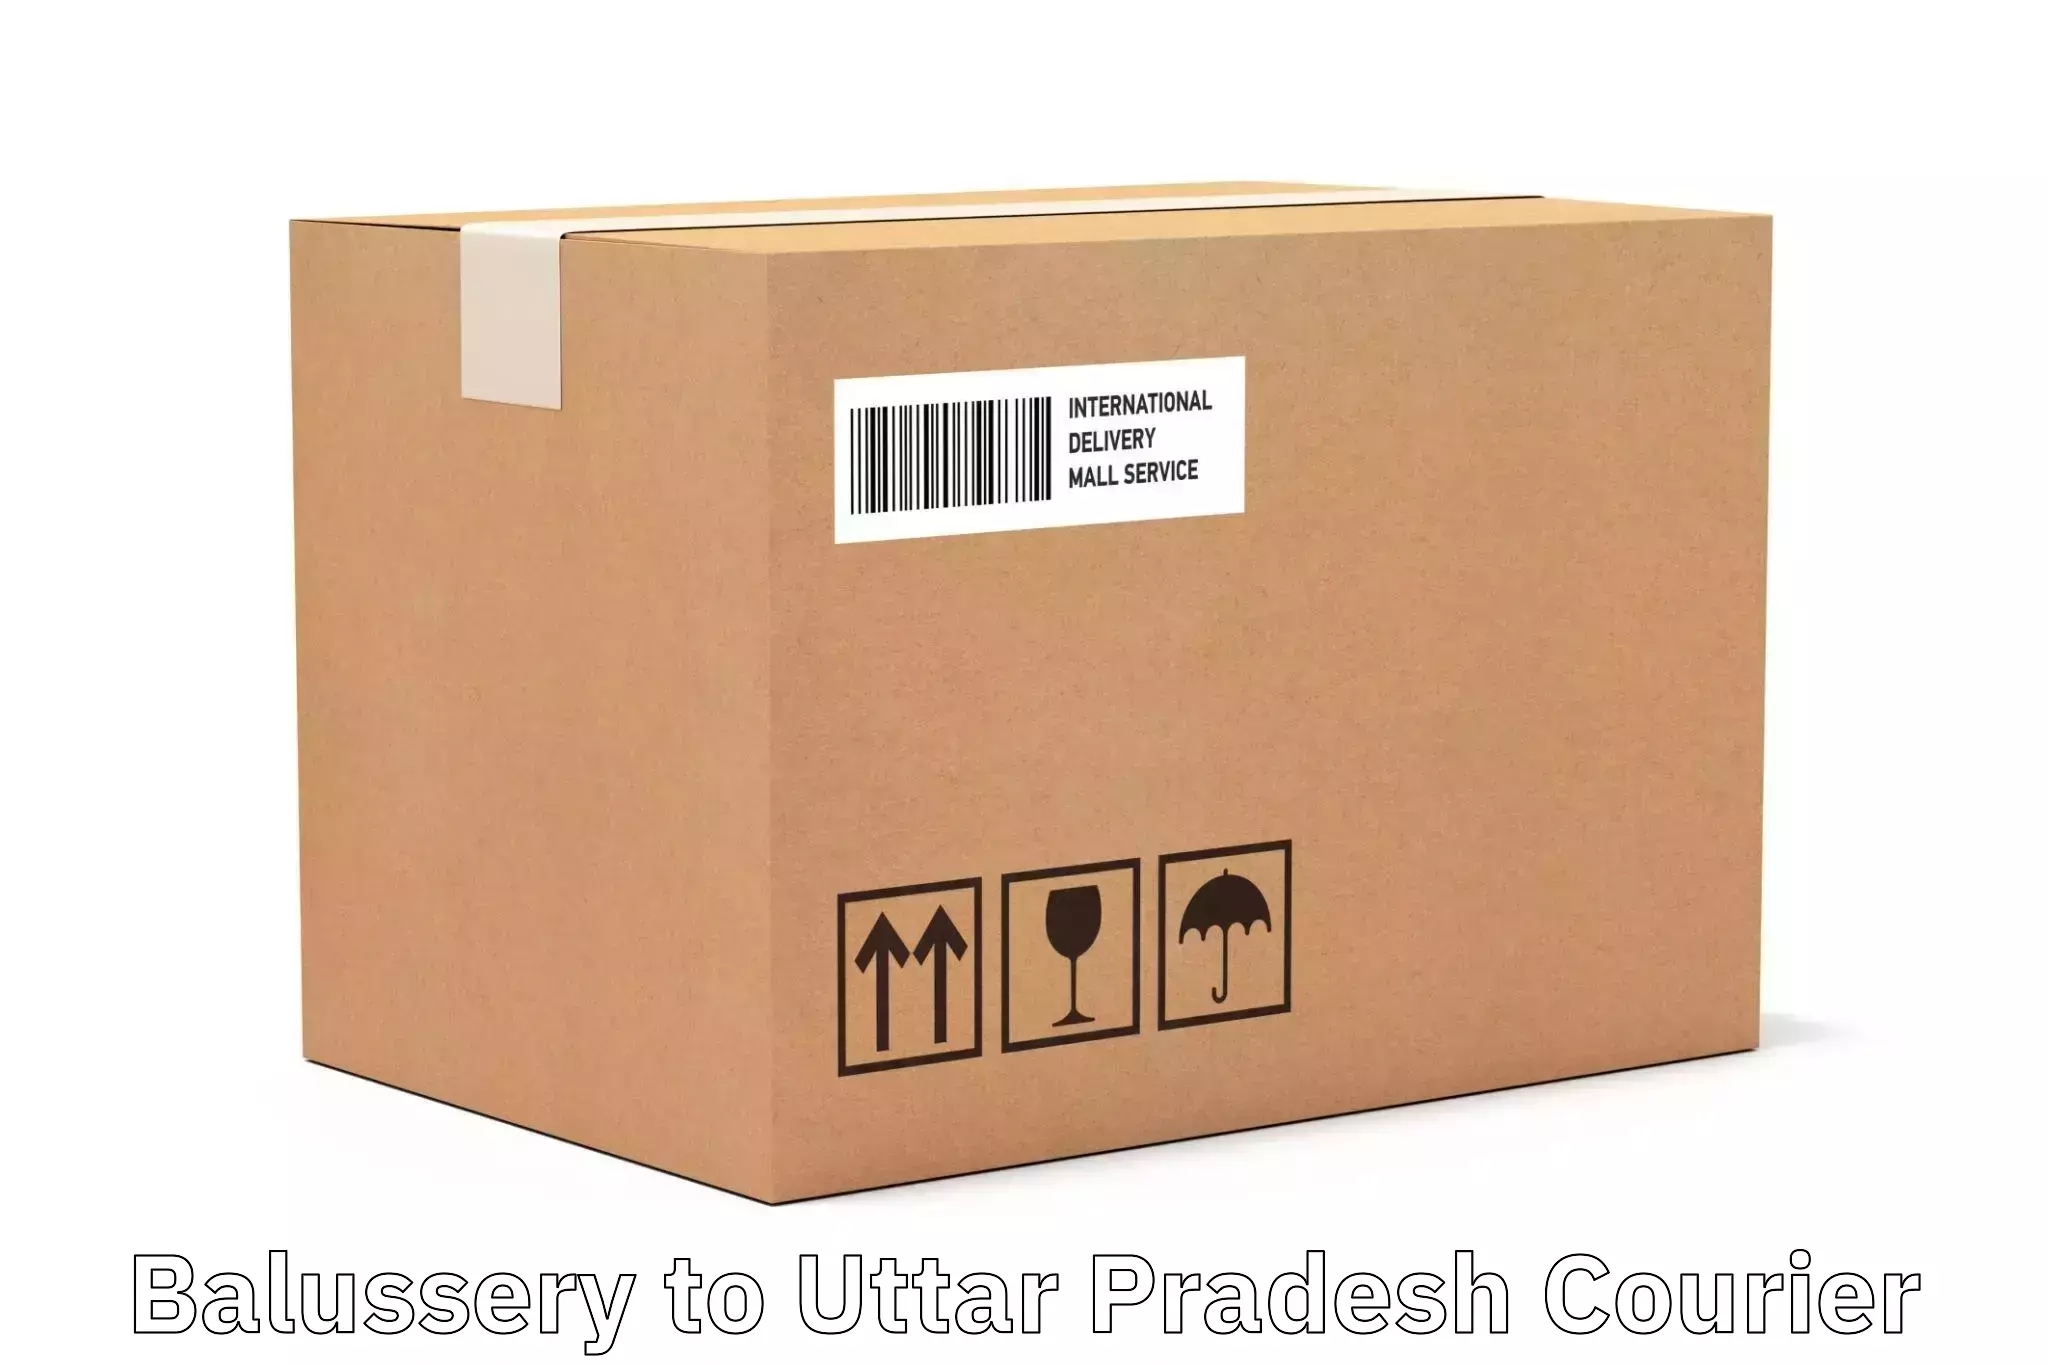 State-of-the-art courier technology Balussery to Fatehpur